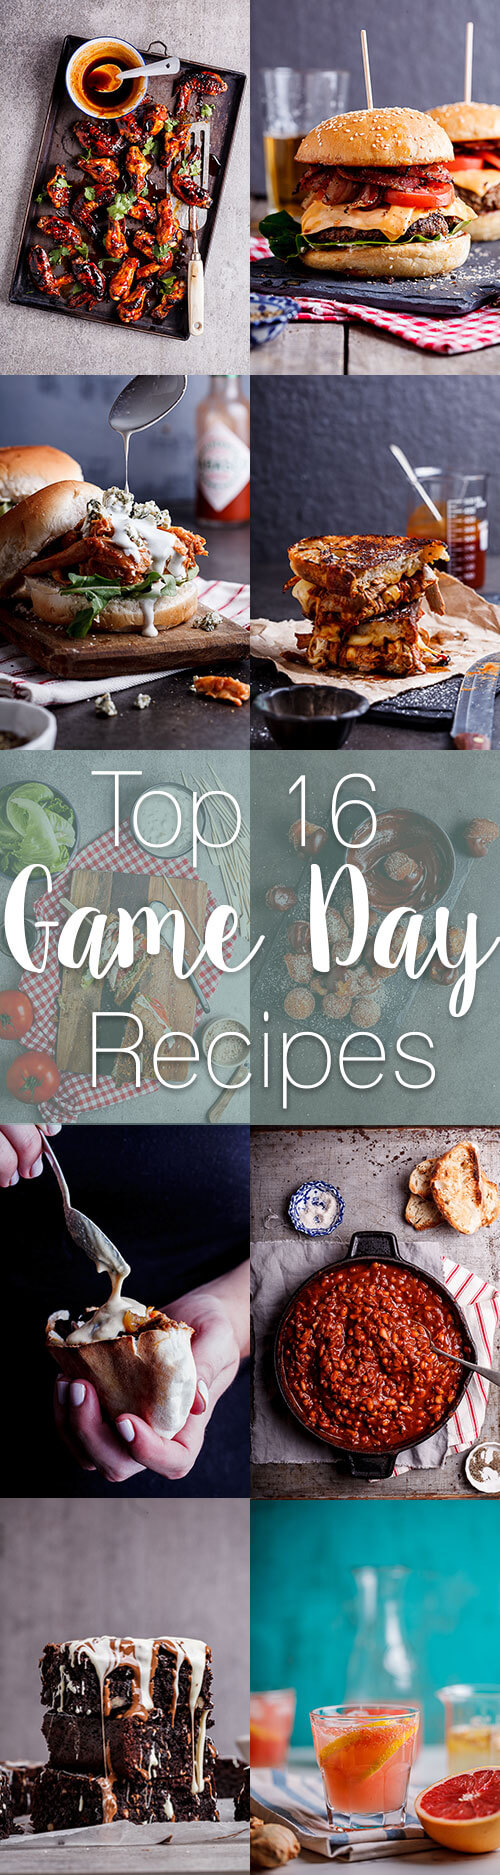 Top 16 Game Day recipes